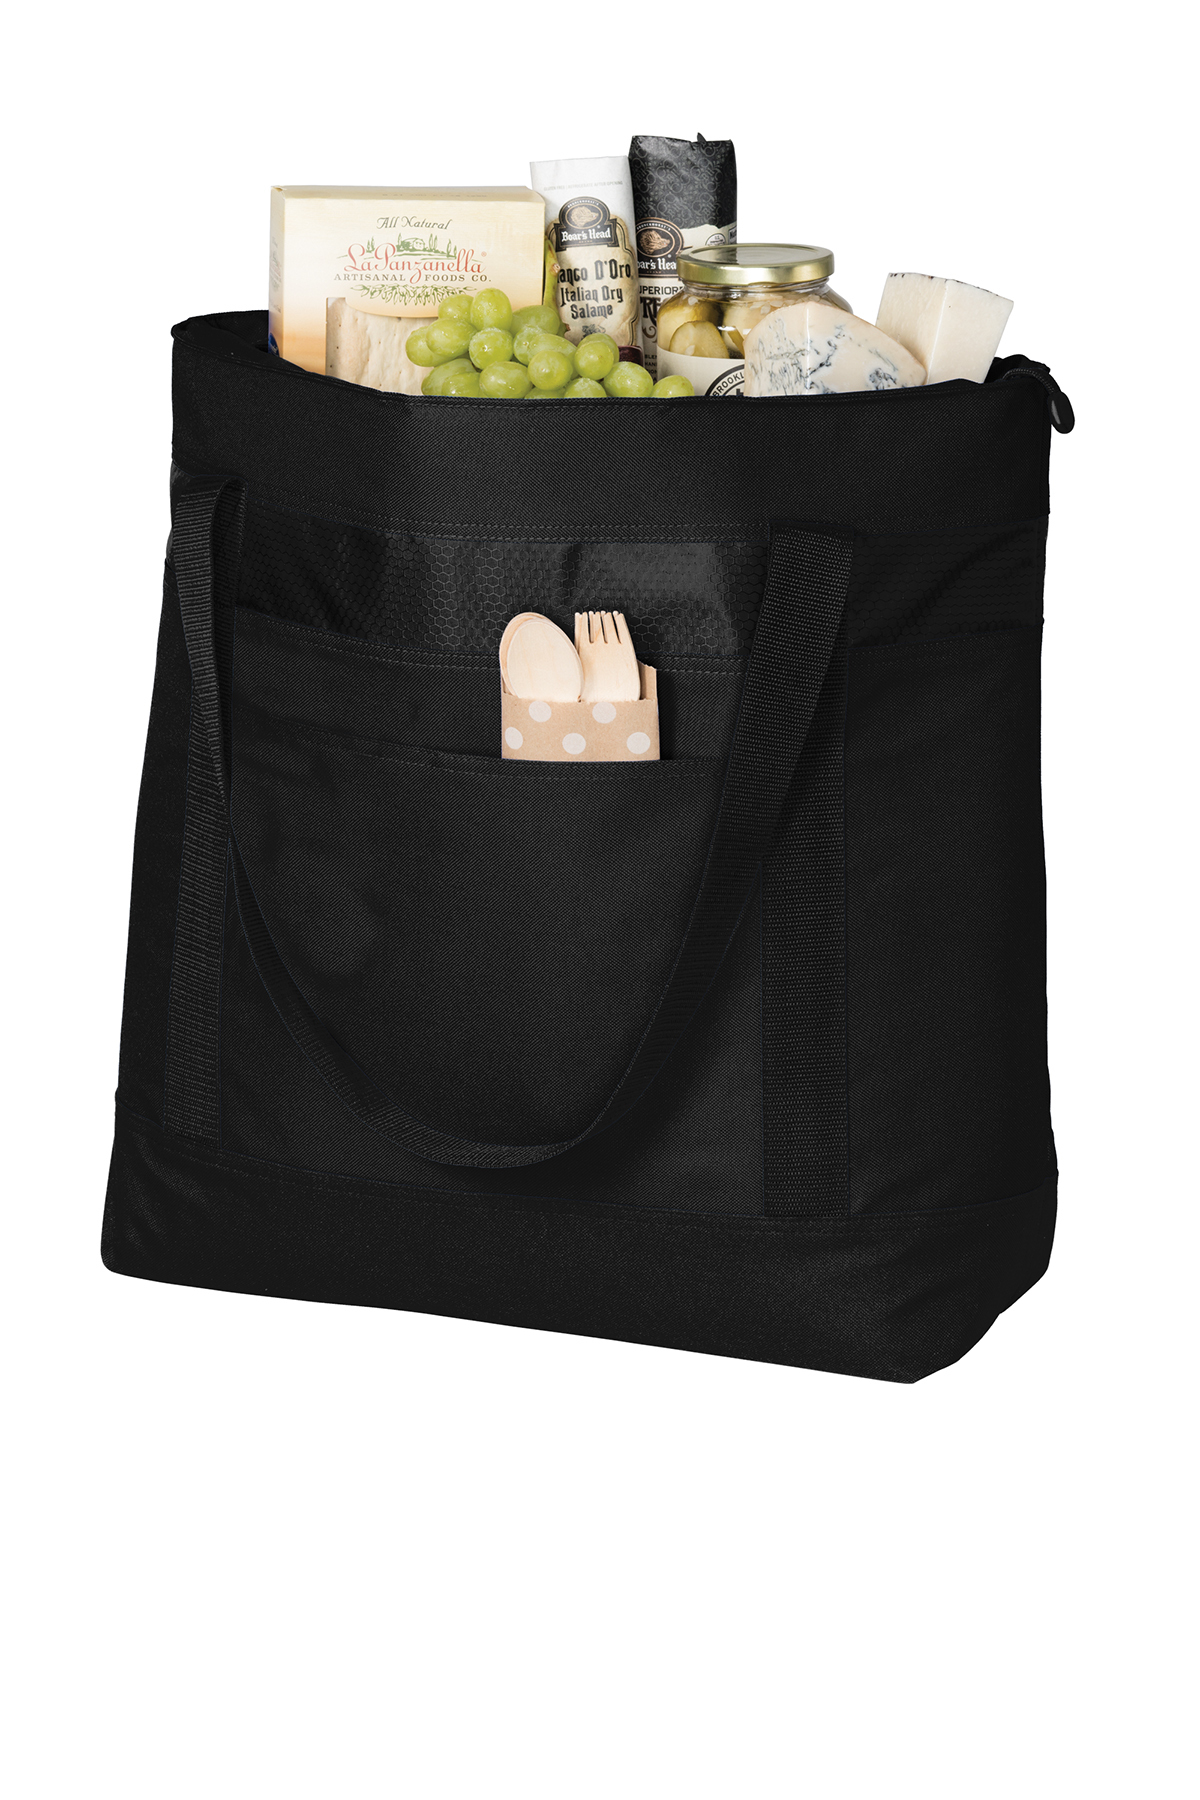 Port Authority Large Tote Cooler | Product | SanMar